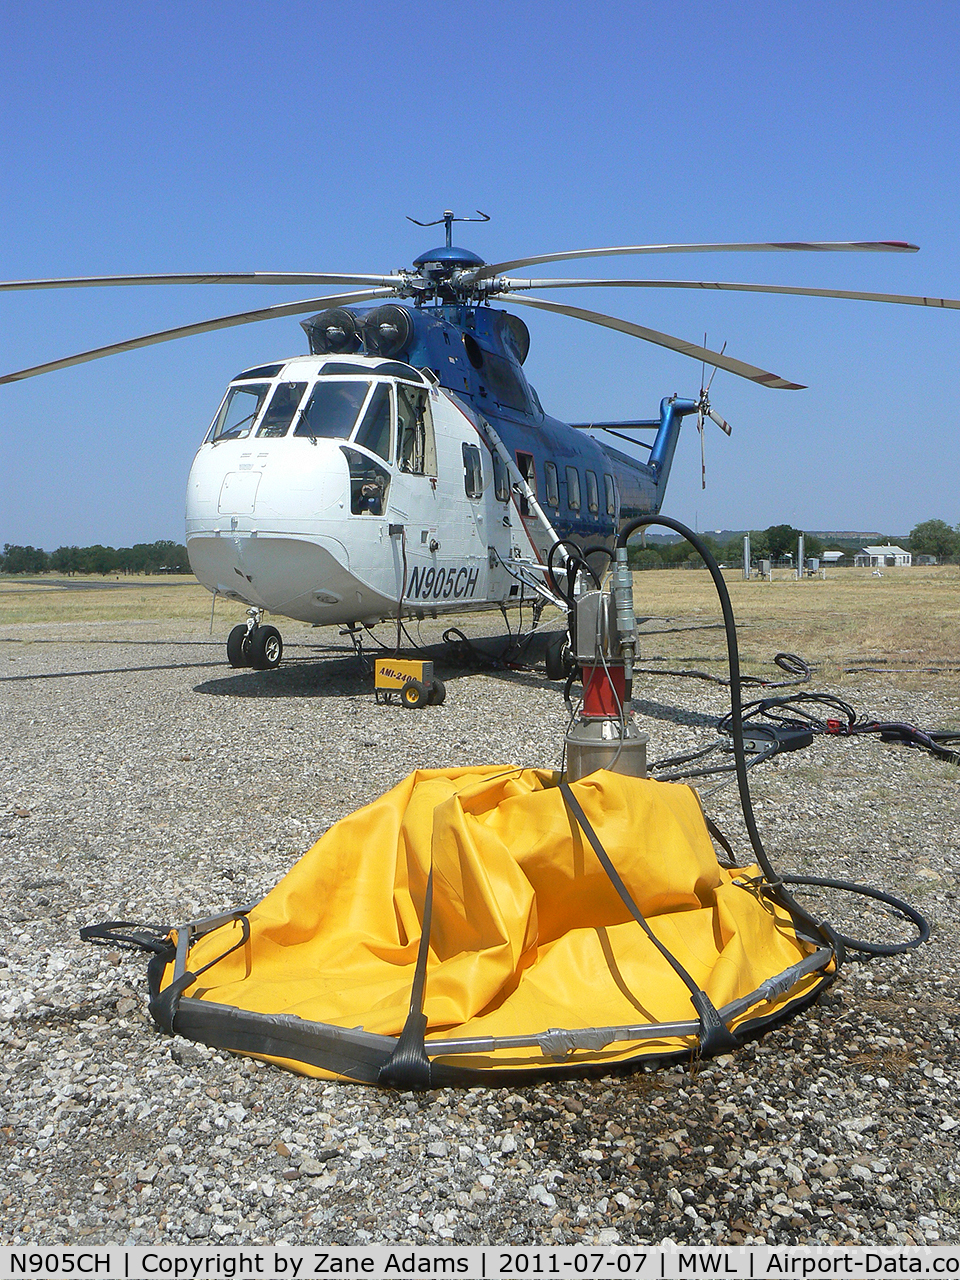 N905CH, 1973 Sikorsky S-61N C/N 61711, Type 1 firefighting helicopter with water bucket at Mineral Wells, TX